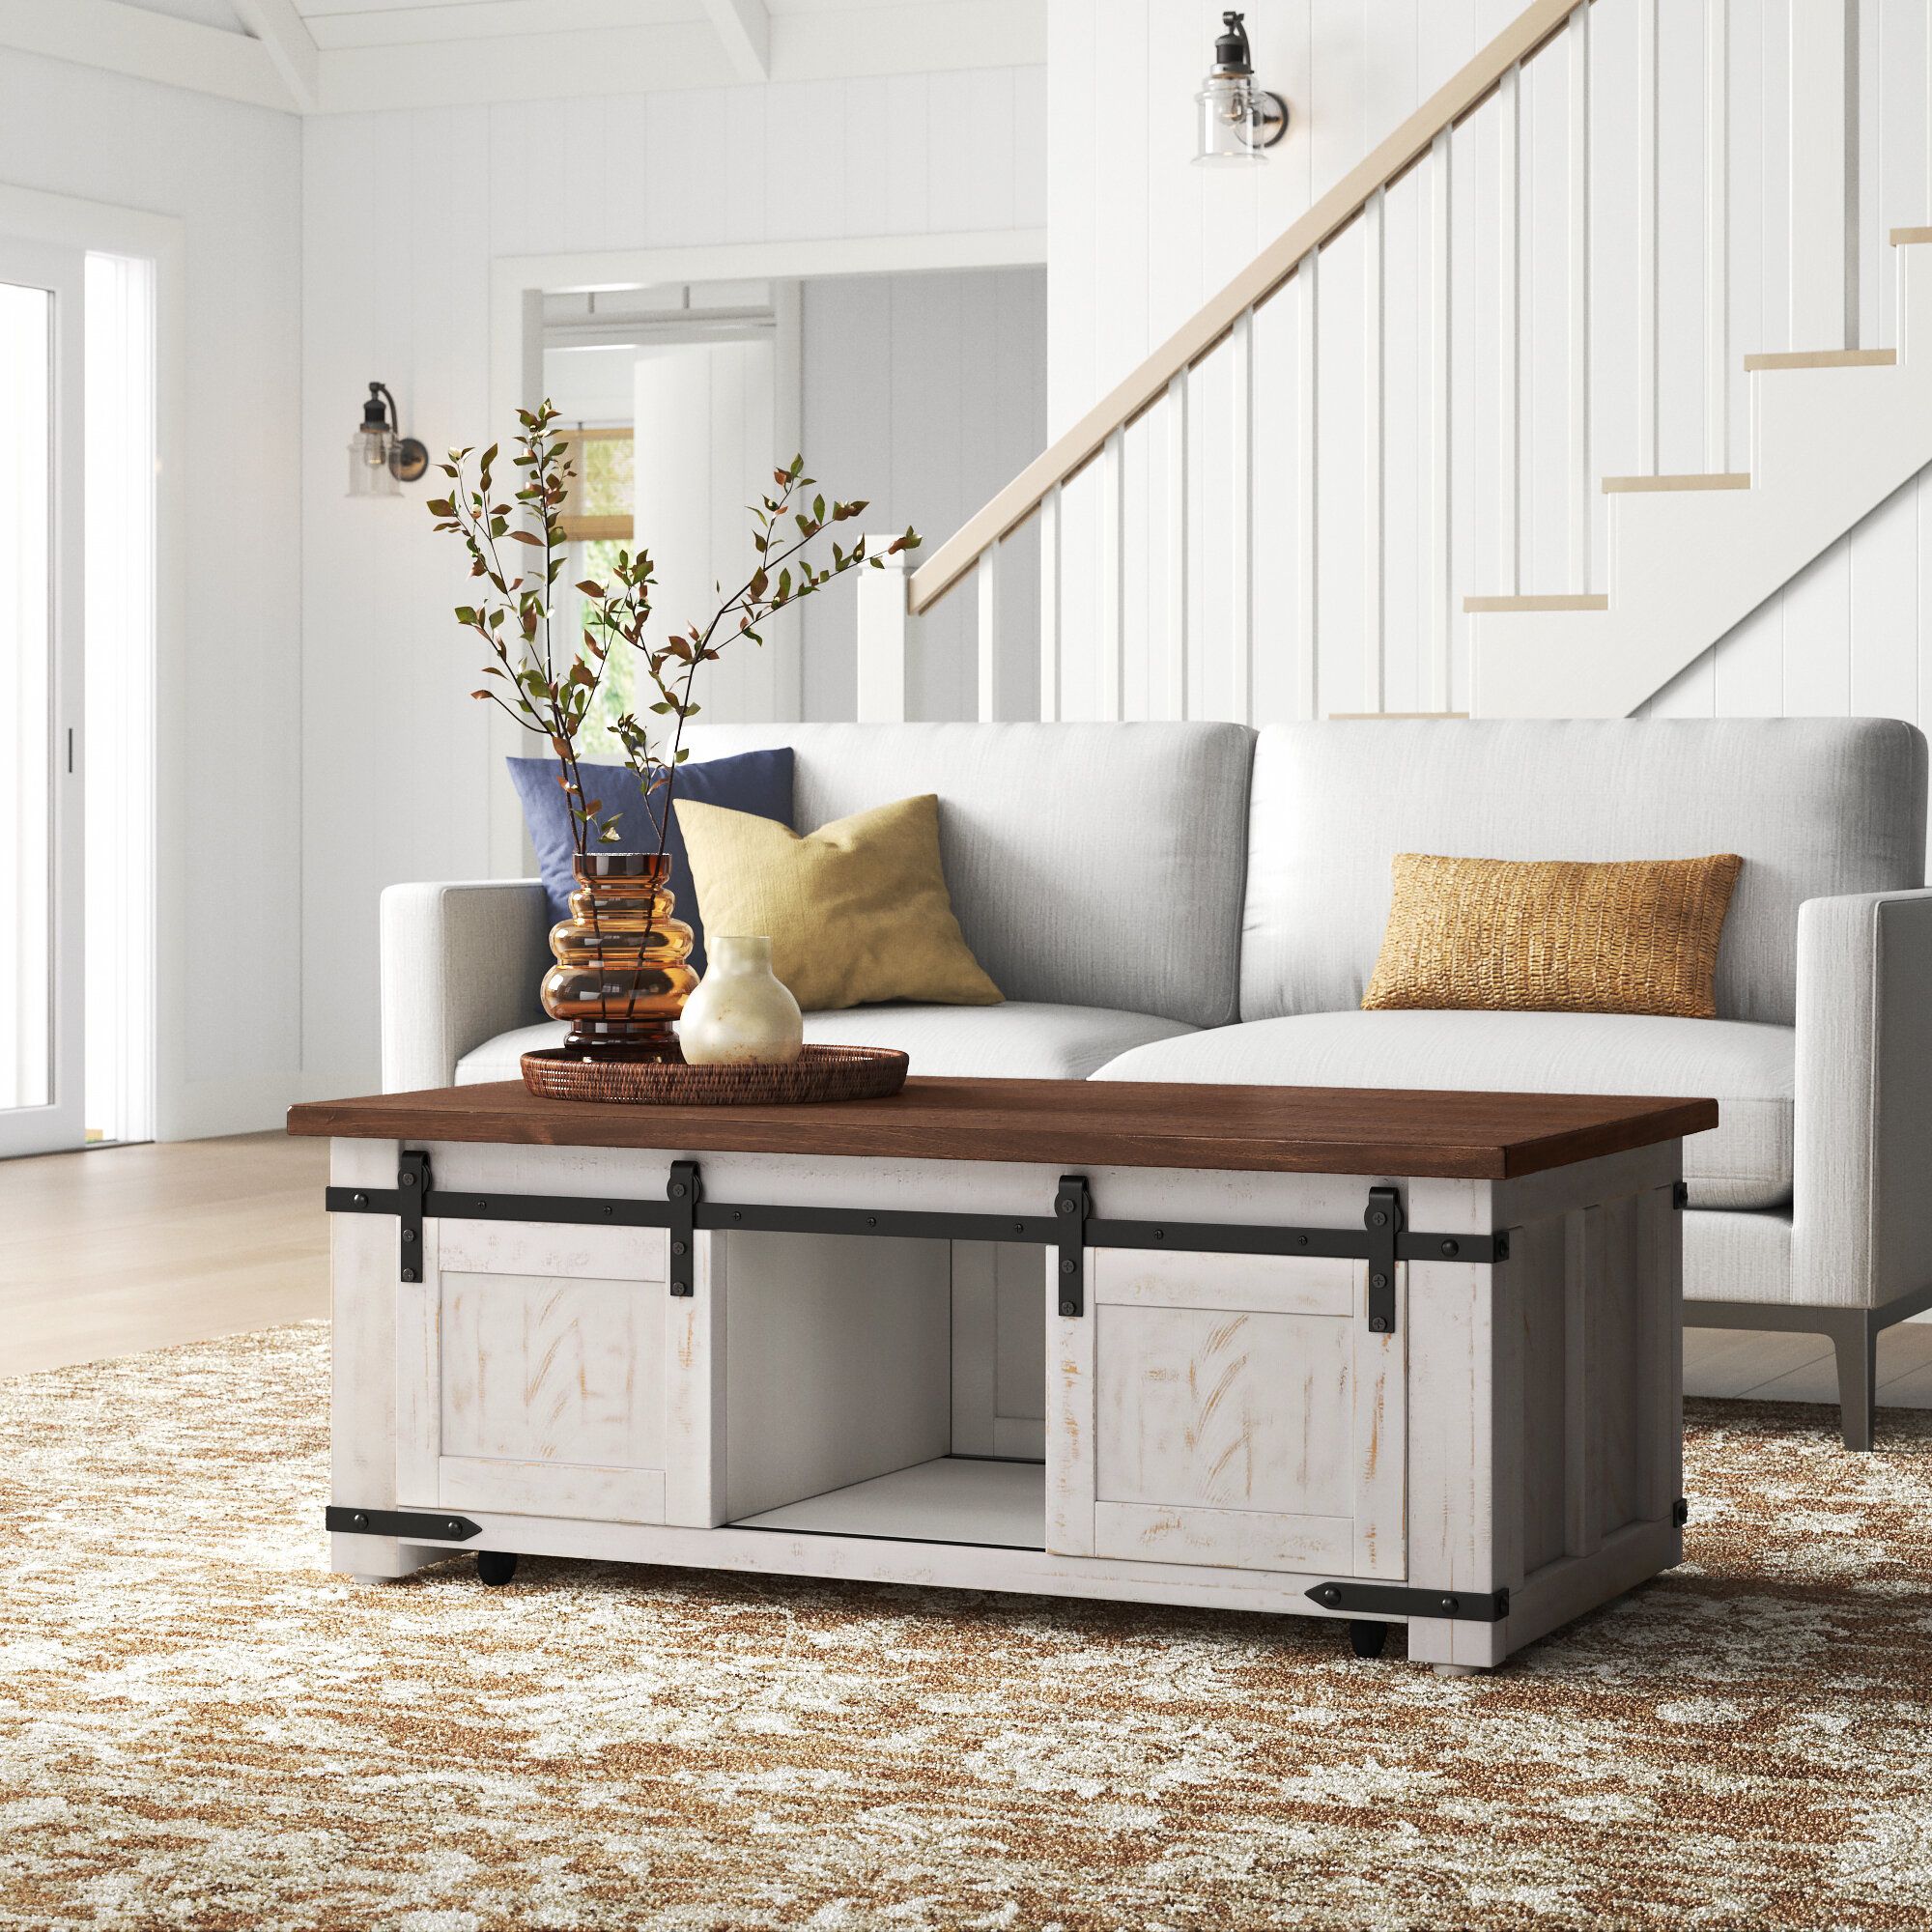 Sand & Stable Sean Coffee Table & Reviews | Wayfair Regarding Coffee Tables With Sliding Barn Doors (View 13 of 15)